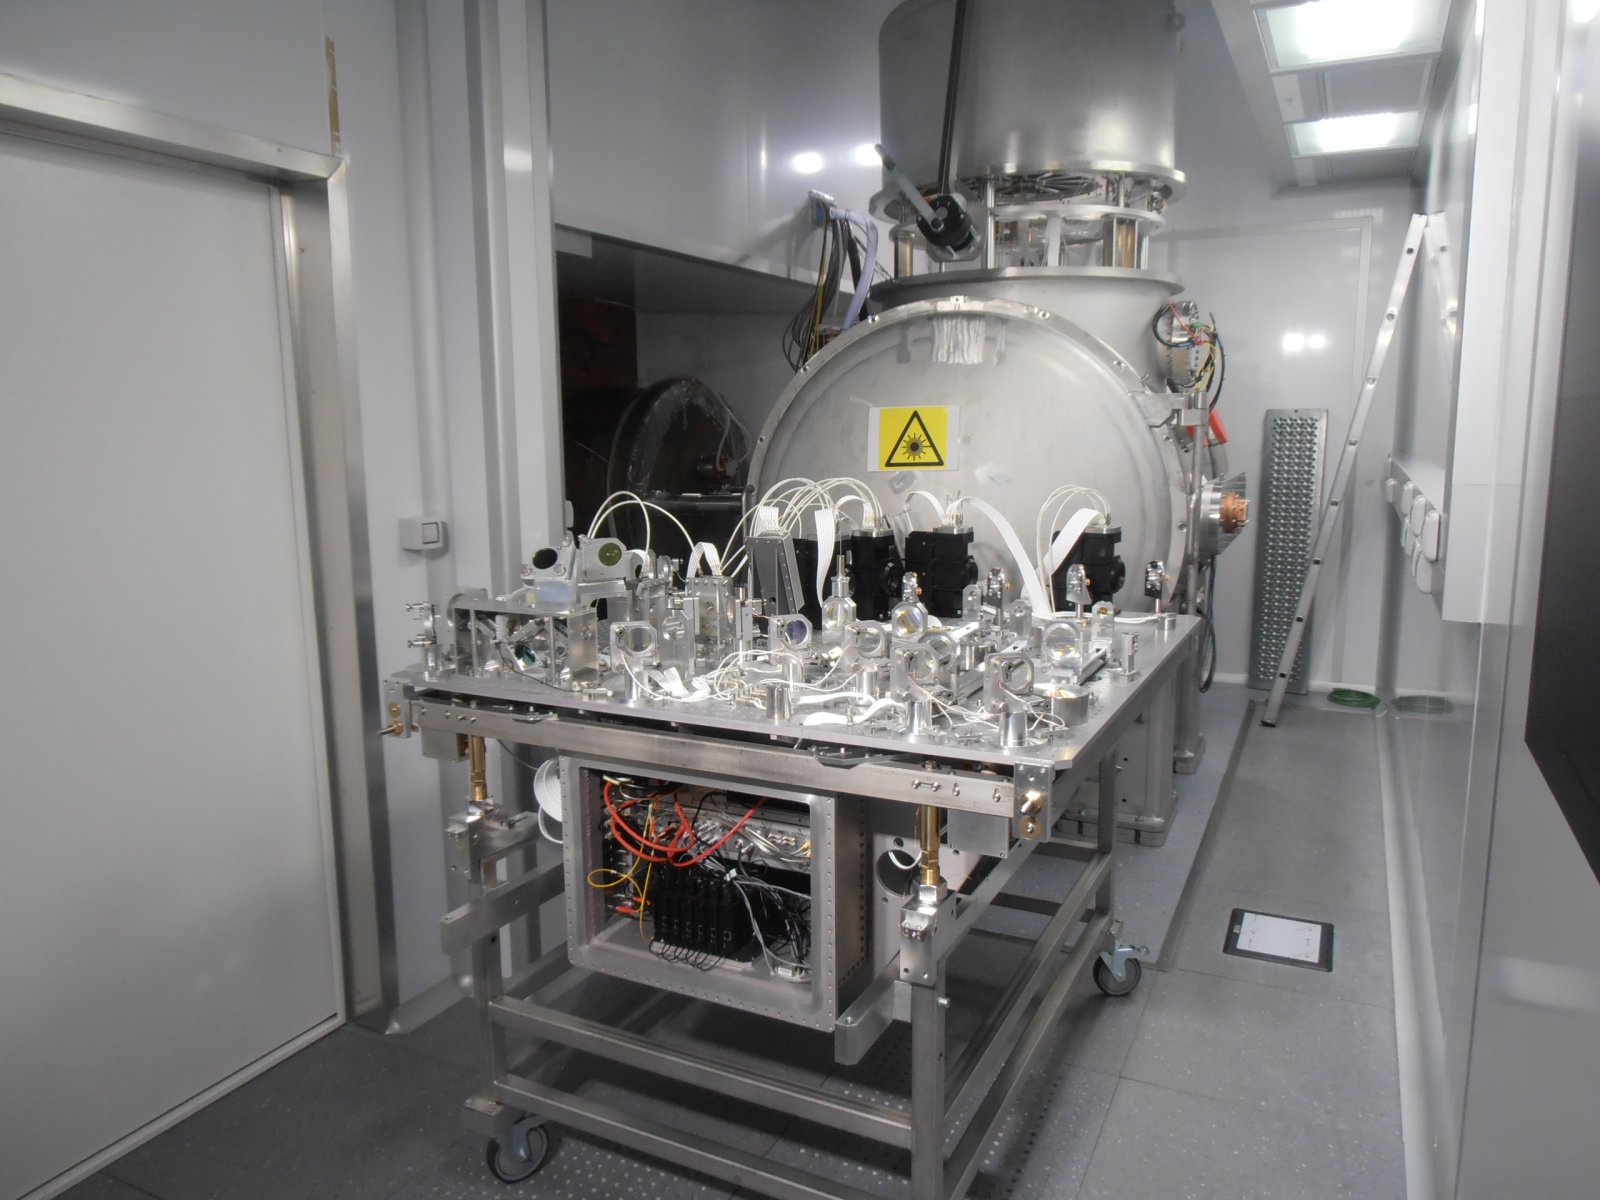 One Advanced Virgo optical bench ready to be inserted into its vacuum tank (July 2015)